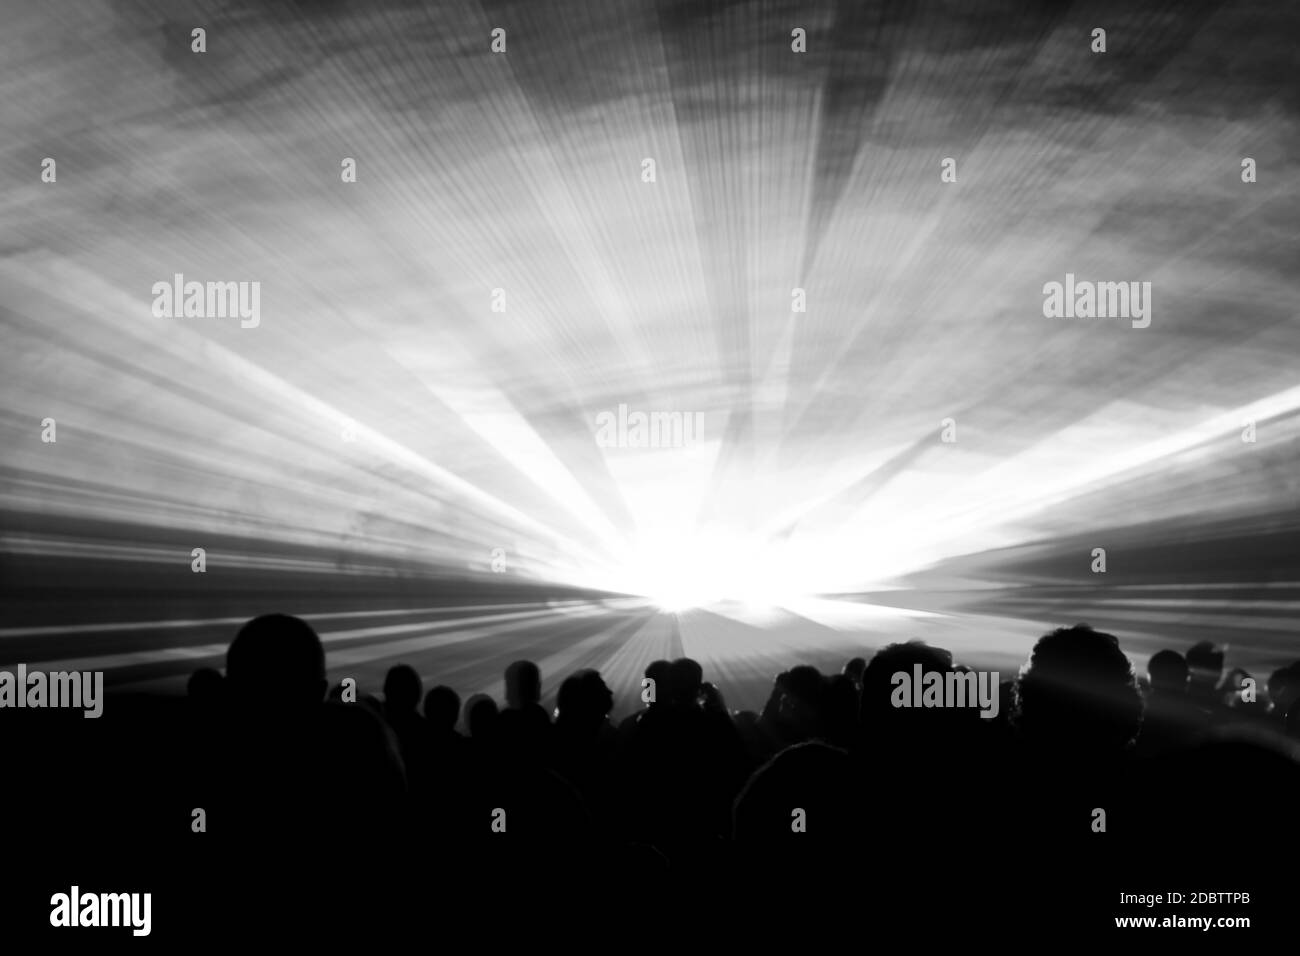 Luxury entertainment with audience silhouettes in nightclub event, festival or New Years Eve. Beams and rays shining colorful lights. Stock Photo